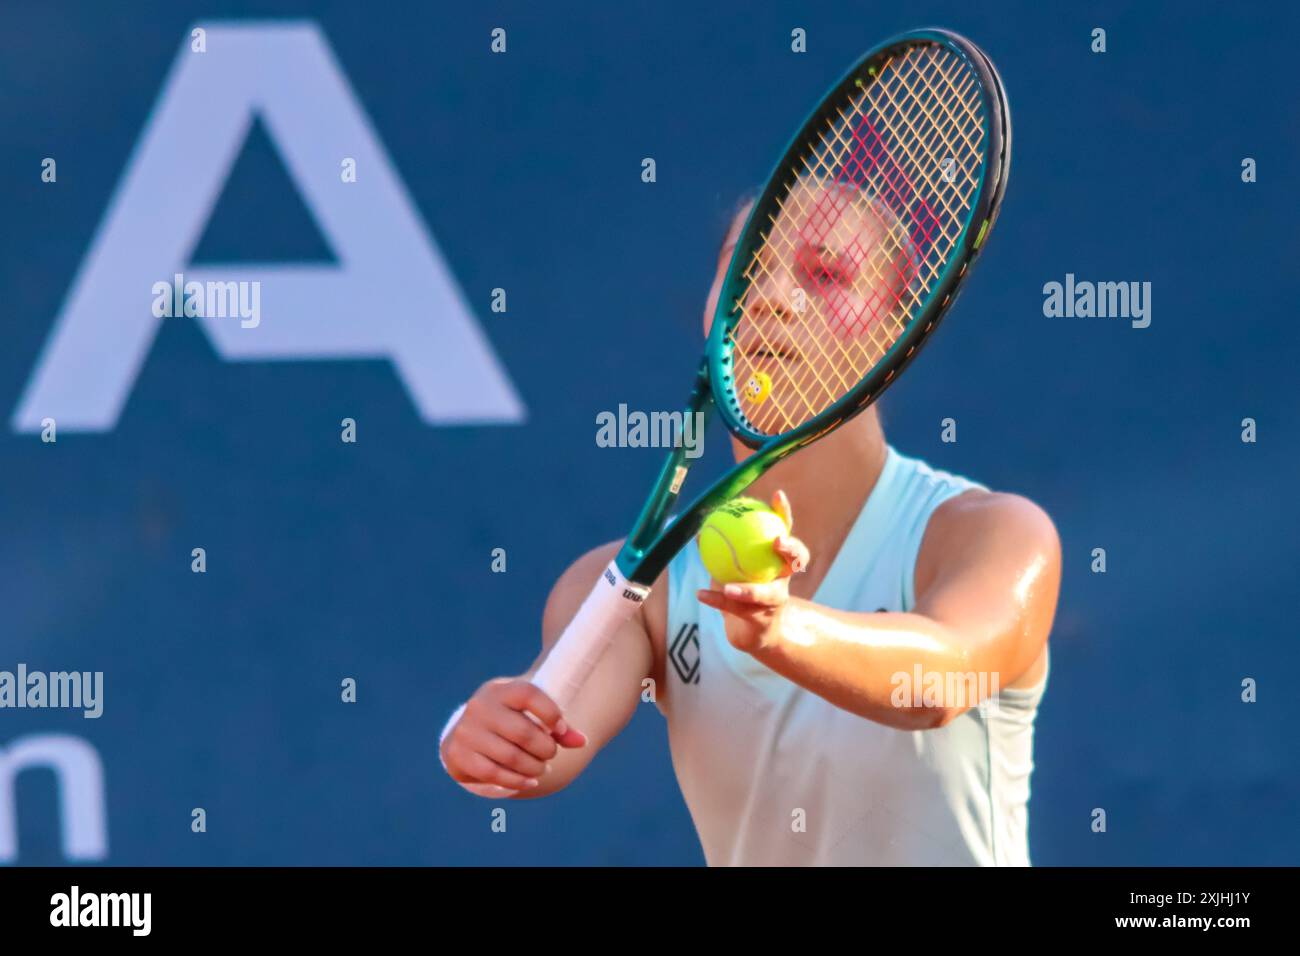 Palermo, Italy. 18th July, 2024. Lucia Bronzetti during the Women's Tennis Association match against Jaqueline Adina Cristian (not pictured) at the Palermo Ladies Open 2024. Jaqueline Adina Cristian beats Lucia Bronzetti 6-3 6-2. (Photo by Antonio Melita/Pacific Press) Credit: Pacific Press Media Production Corp./Alamy Live News Stock Photo